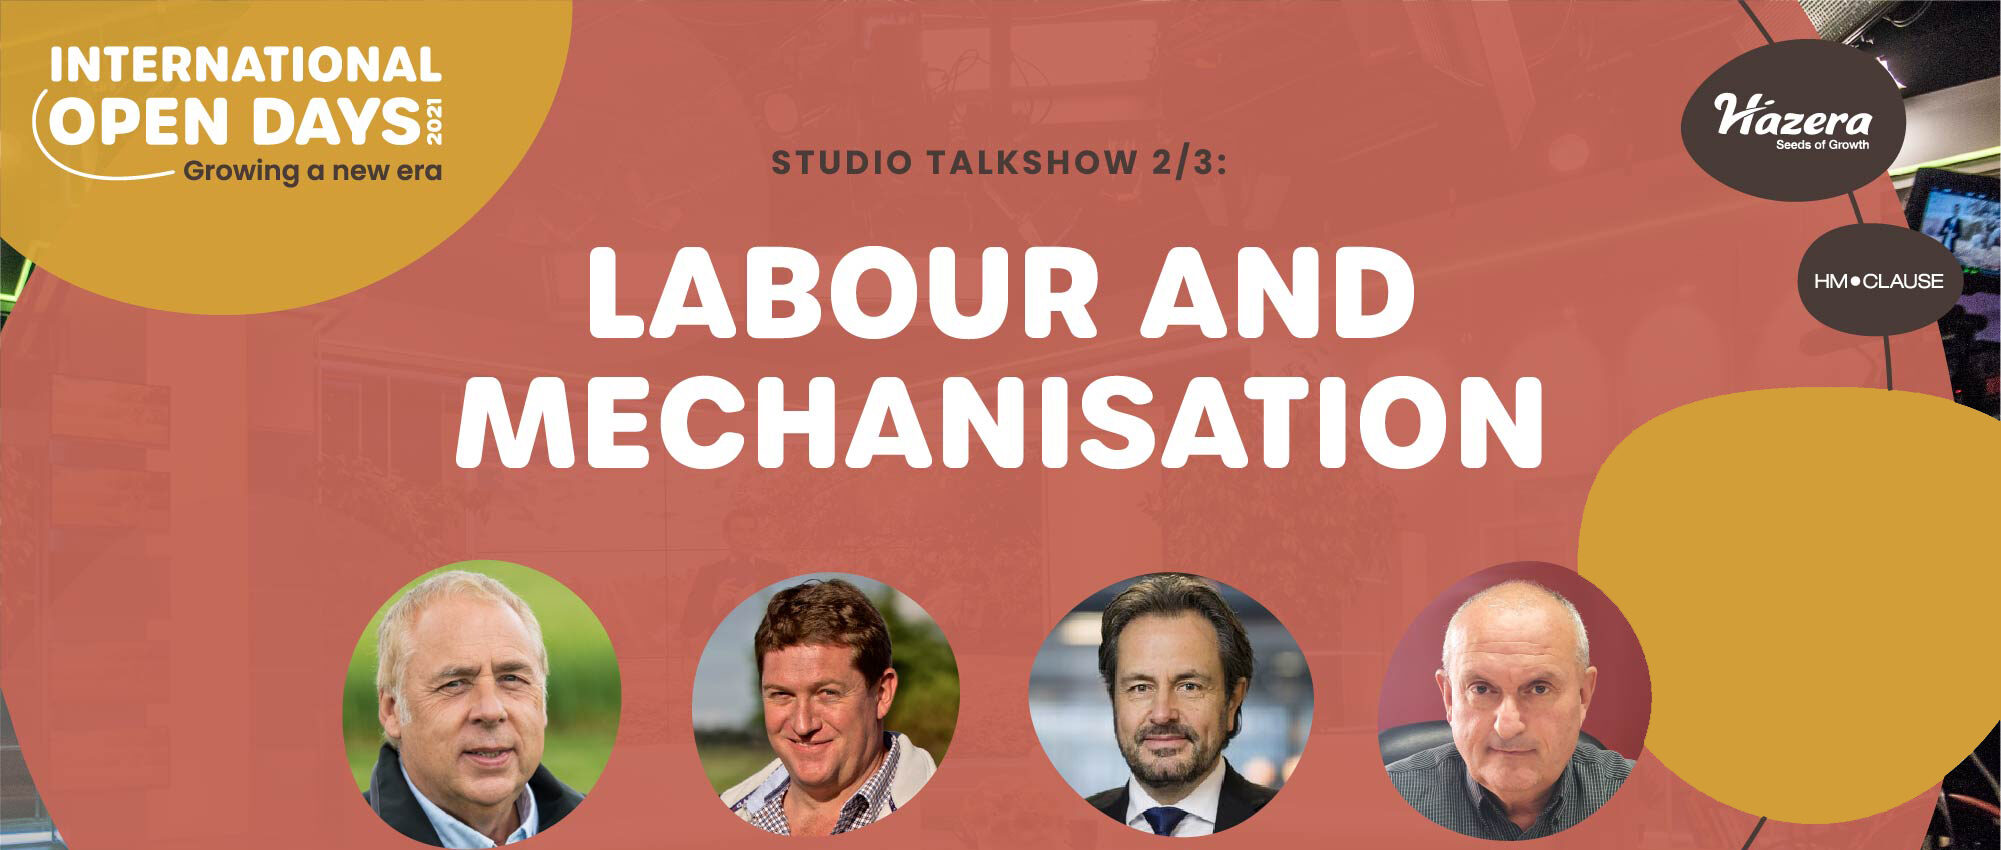 Insights and trends on labor & mechanization